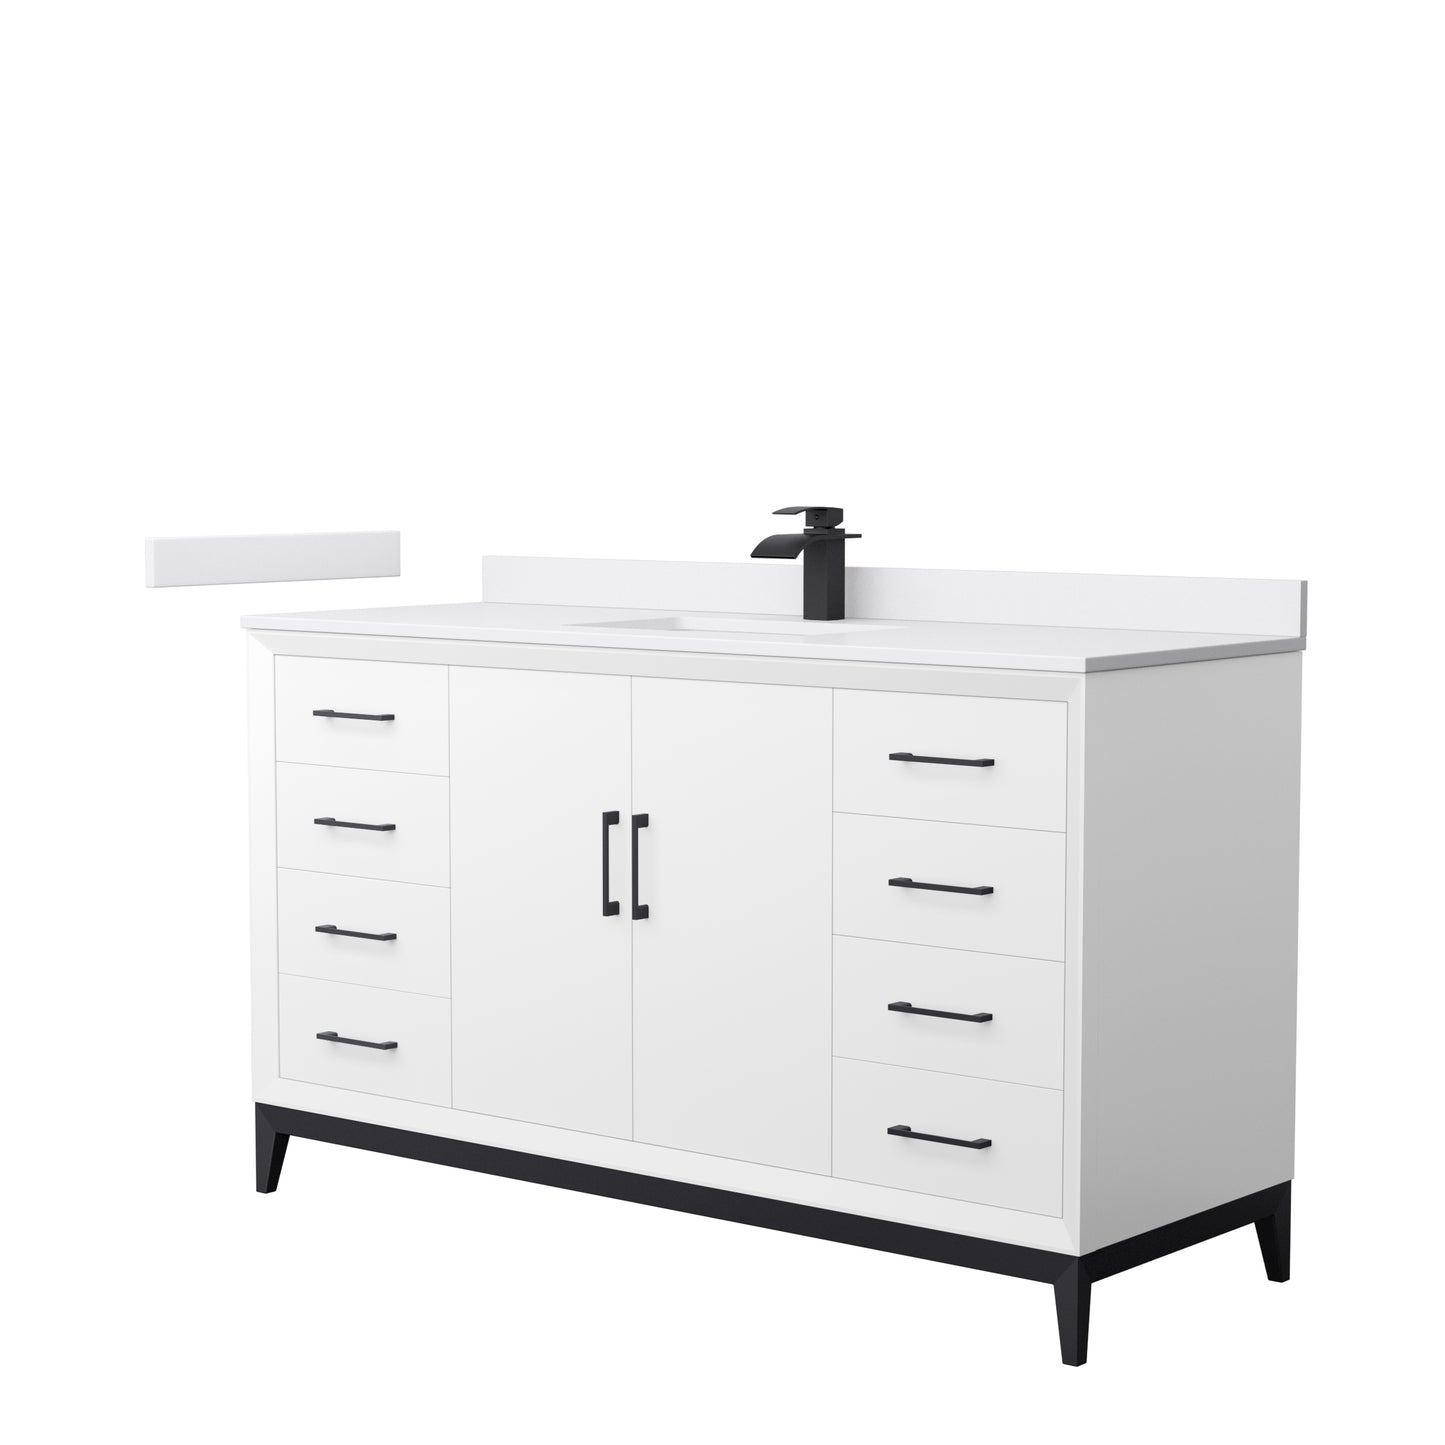 Wyndham Collection Amici 60 Inch Single Bathroom Vanity in White, White Cultured Marble Countertop, Undermount Square Sink - Luxe Bathroom Vanities